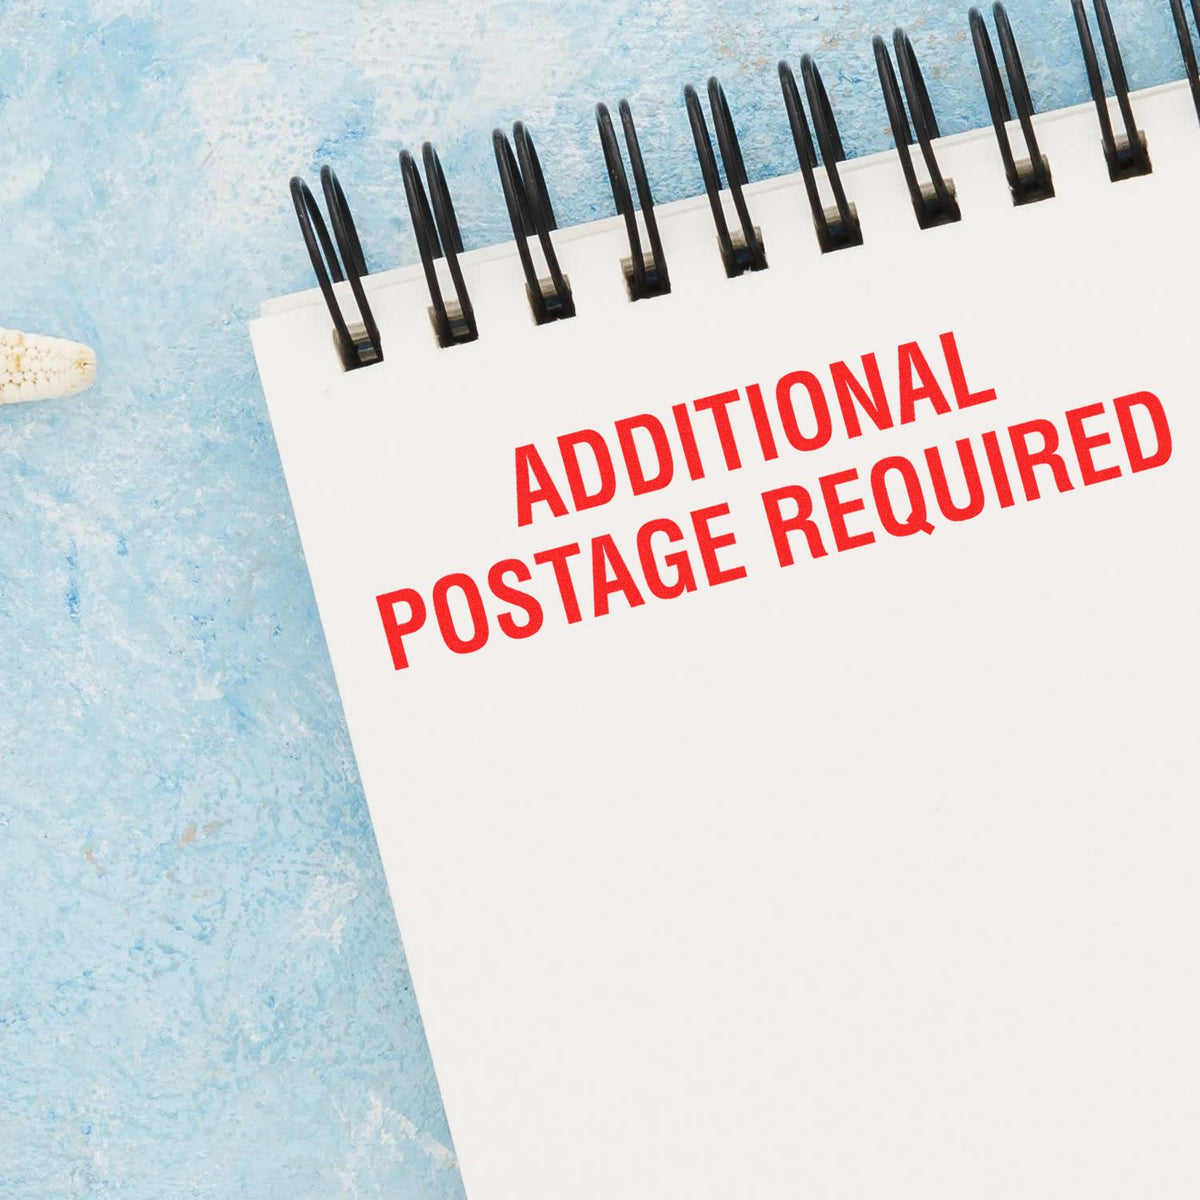 Additional Postage Required Rubber Stamp In Use Photo